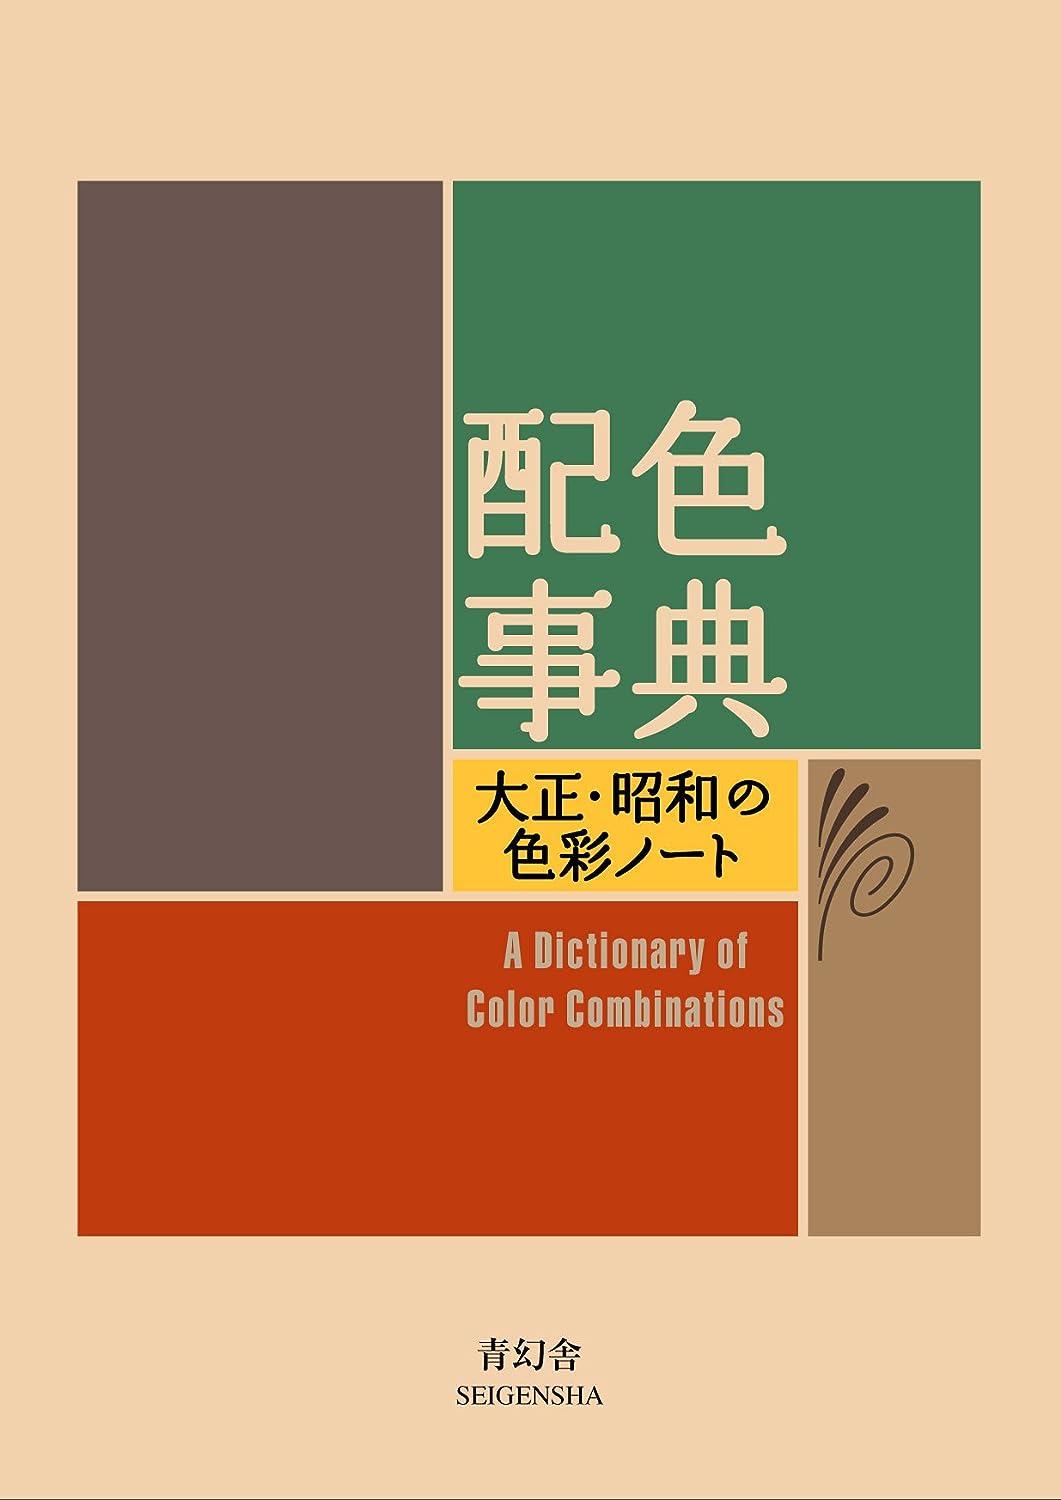 books about color theory1